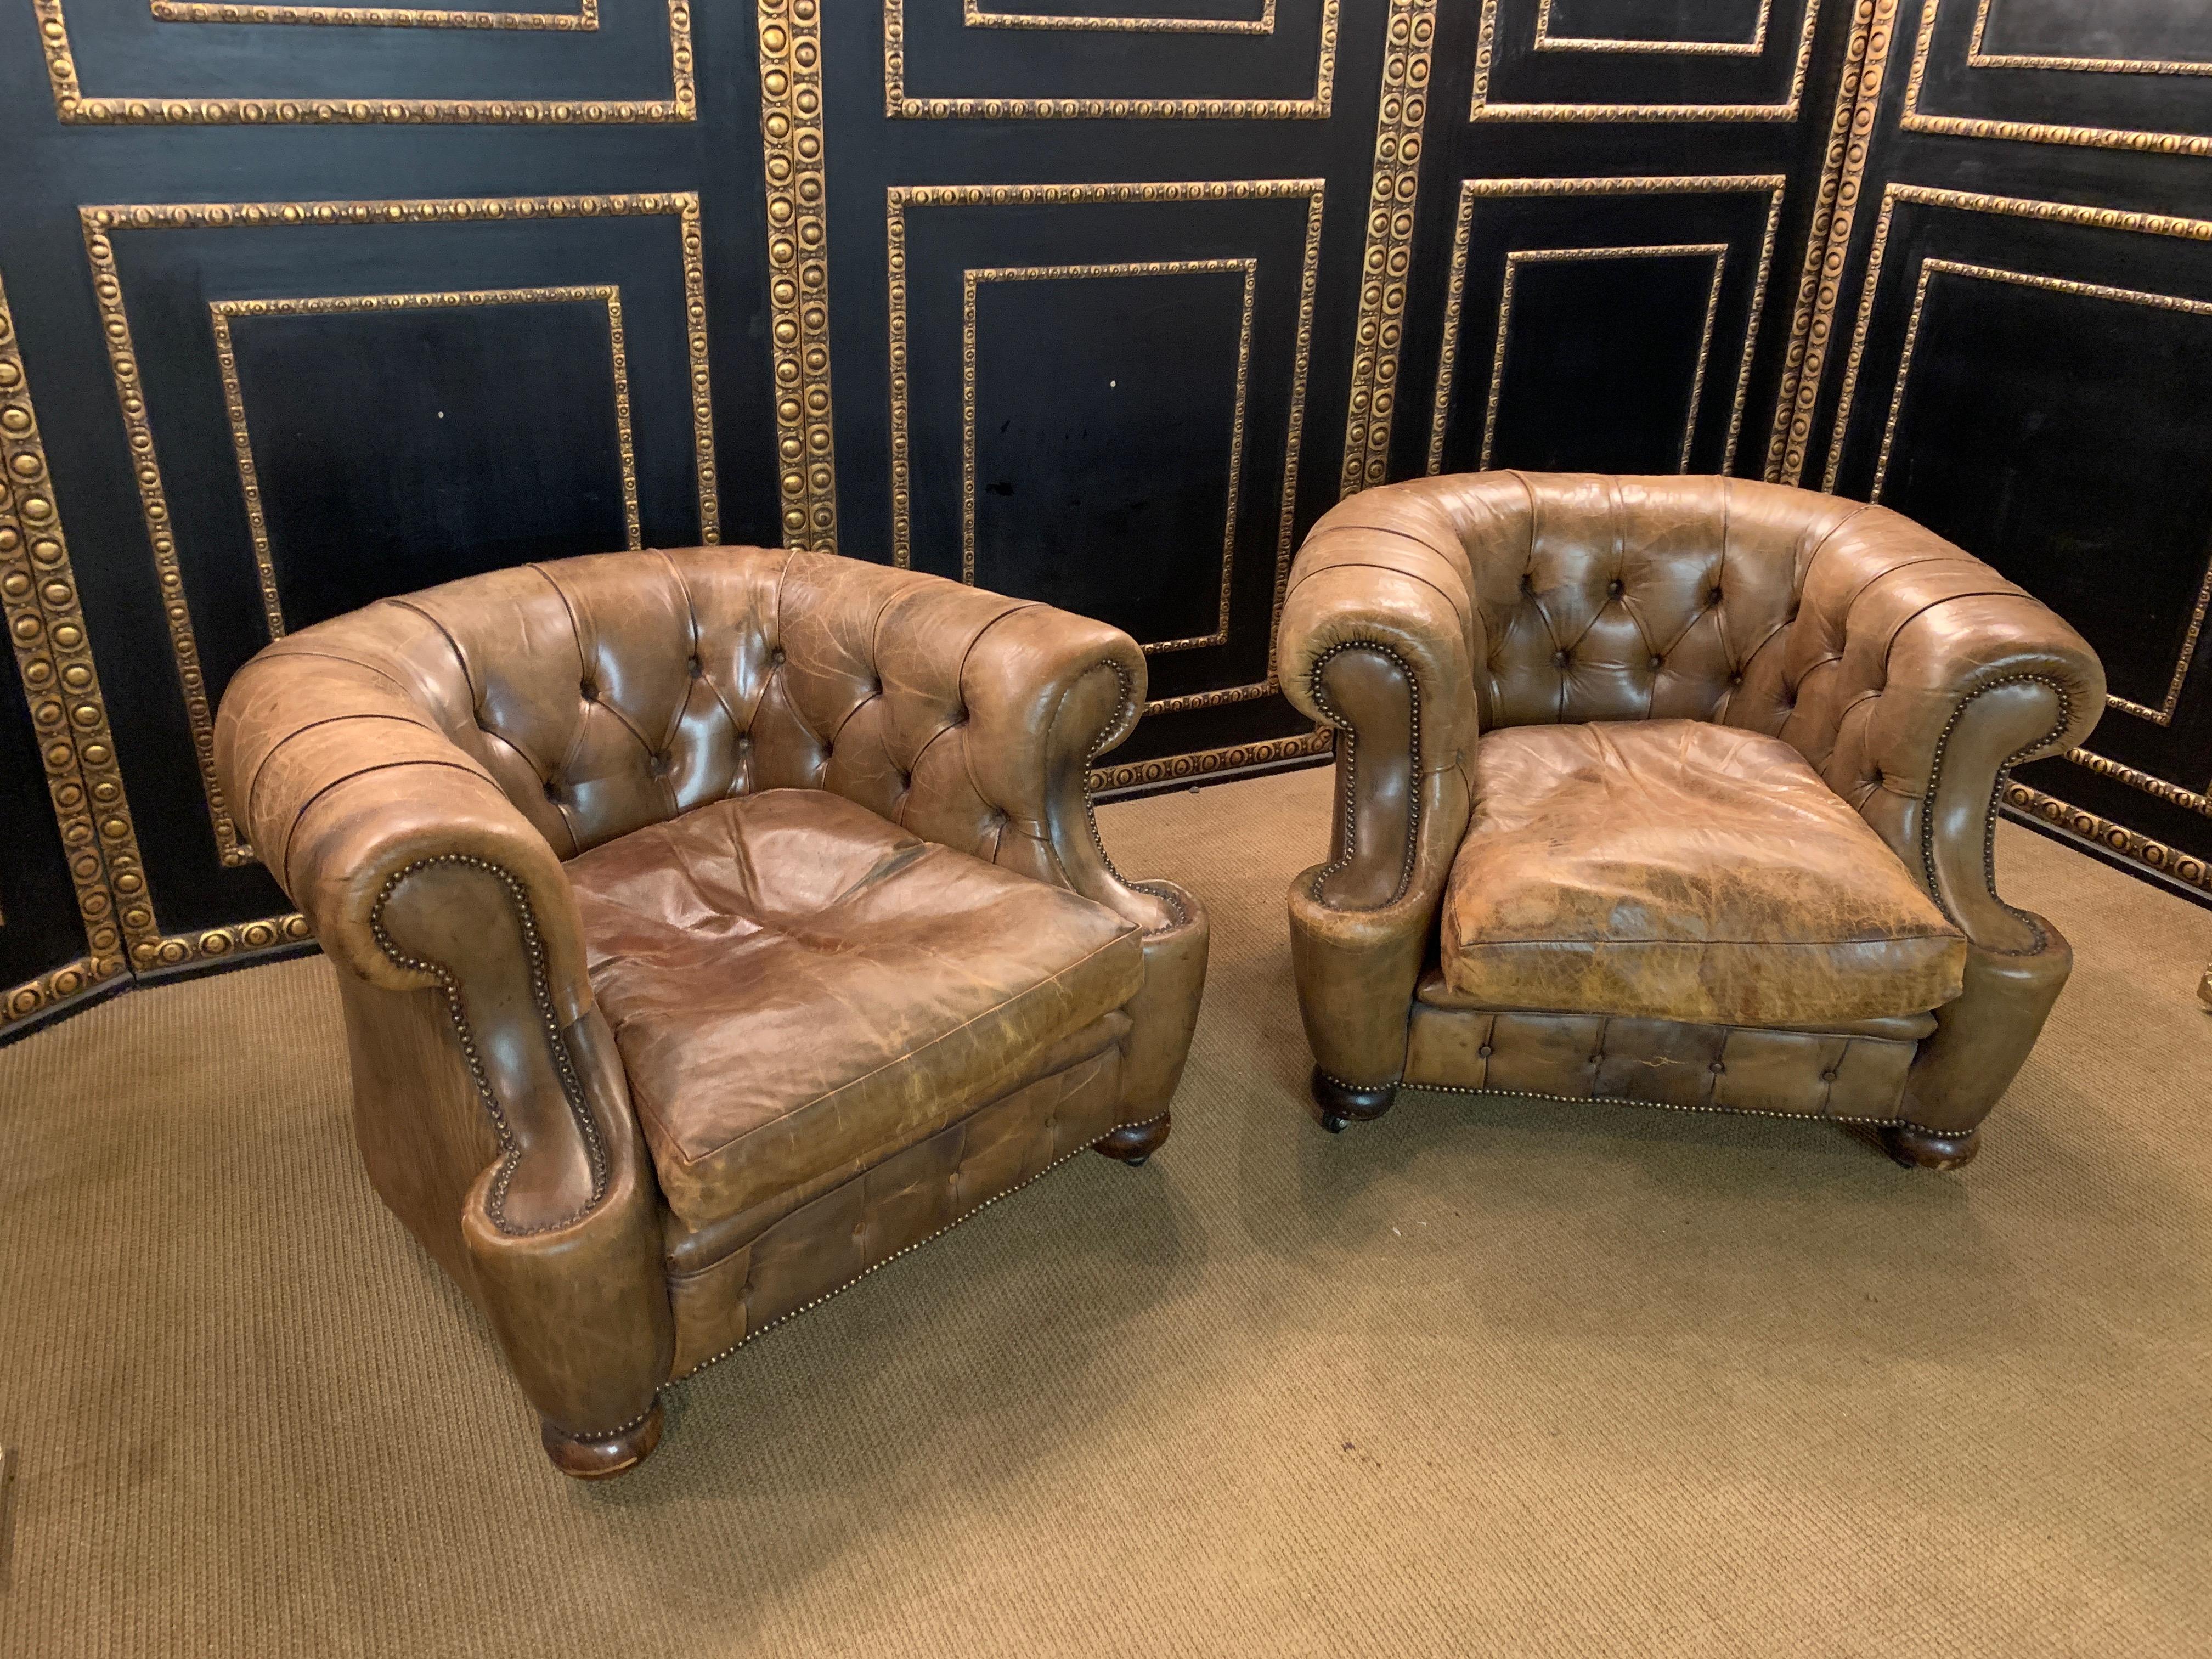 We are delighted to offer for sale this lovely original circa 1930s hand dyed cigar brown leather Chesterfield club armchairs

A good looking and iconic piece of English furniture. Known the world over as one of the most sophisticated club